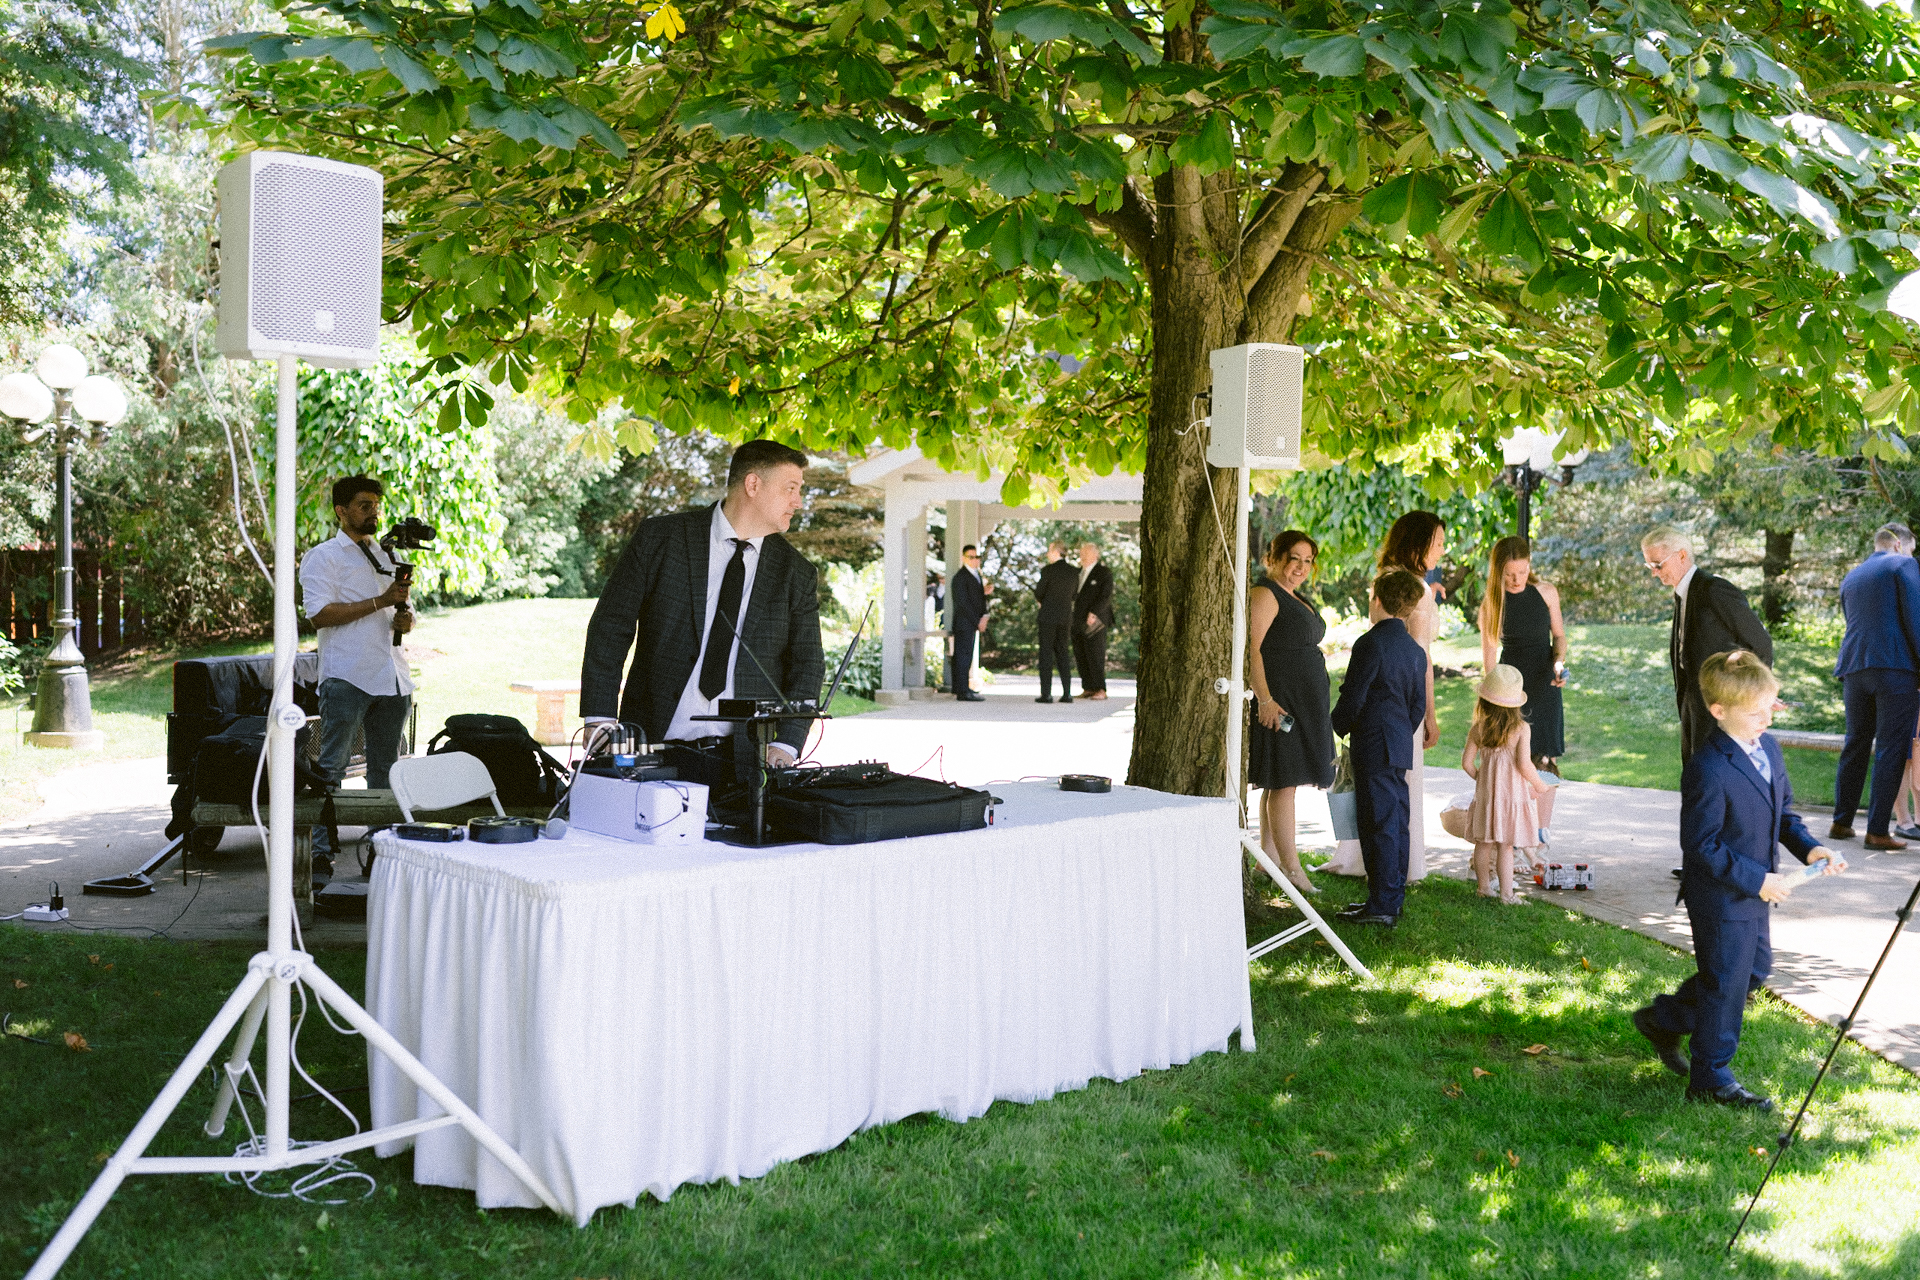 Outdoor event with guests and a dj setup under a tree.